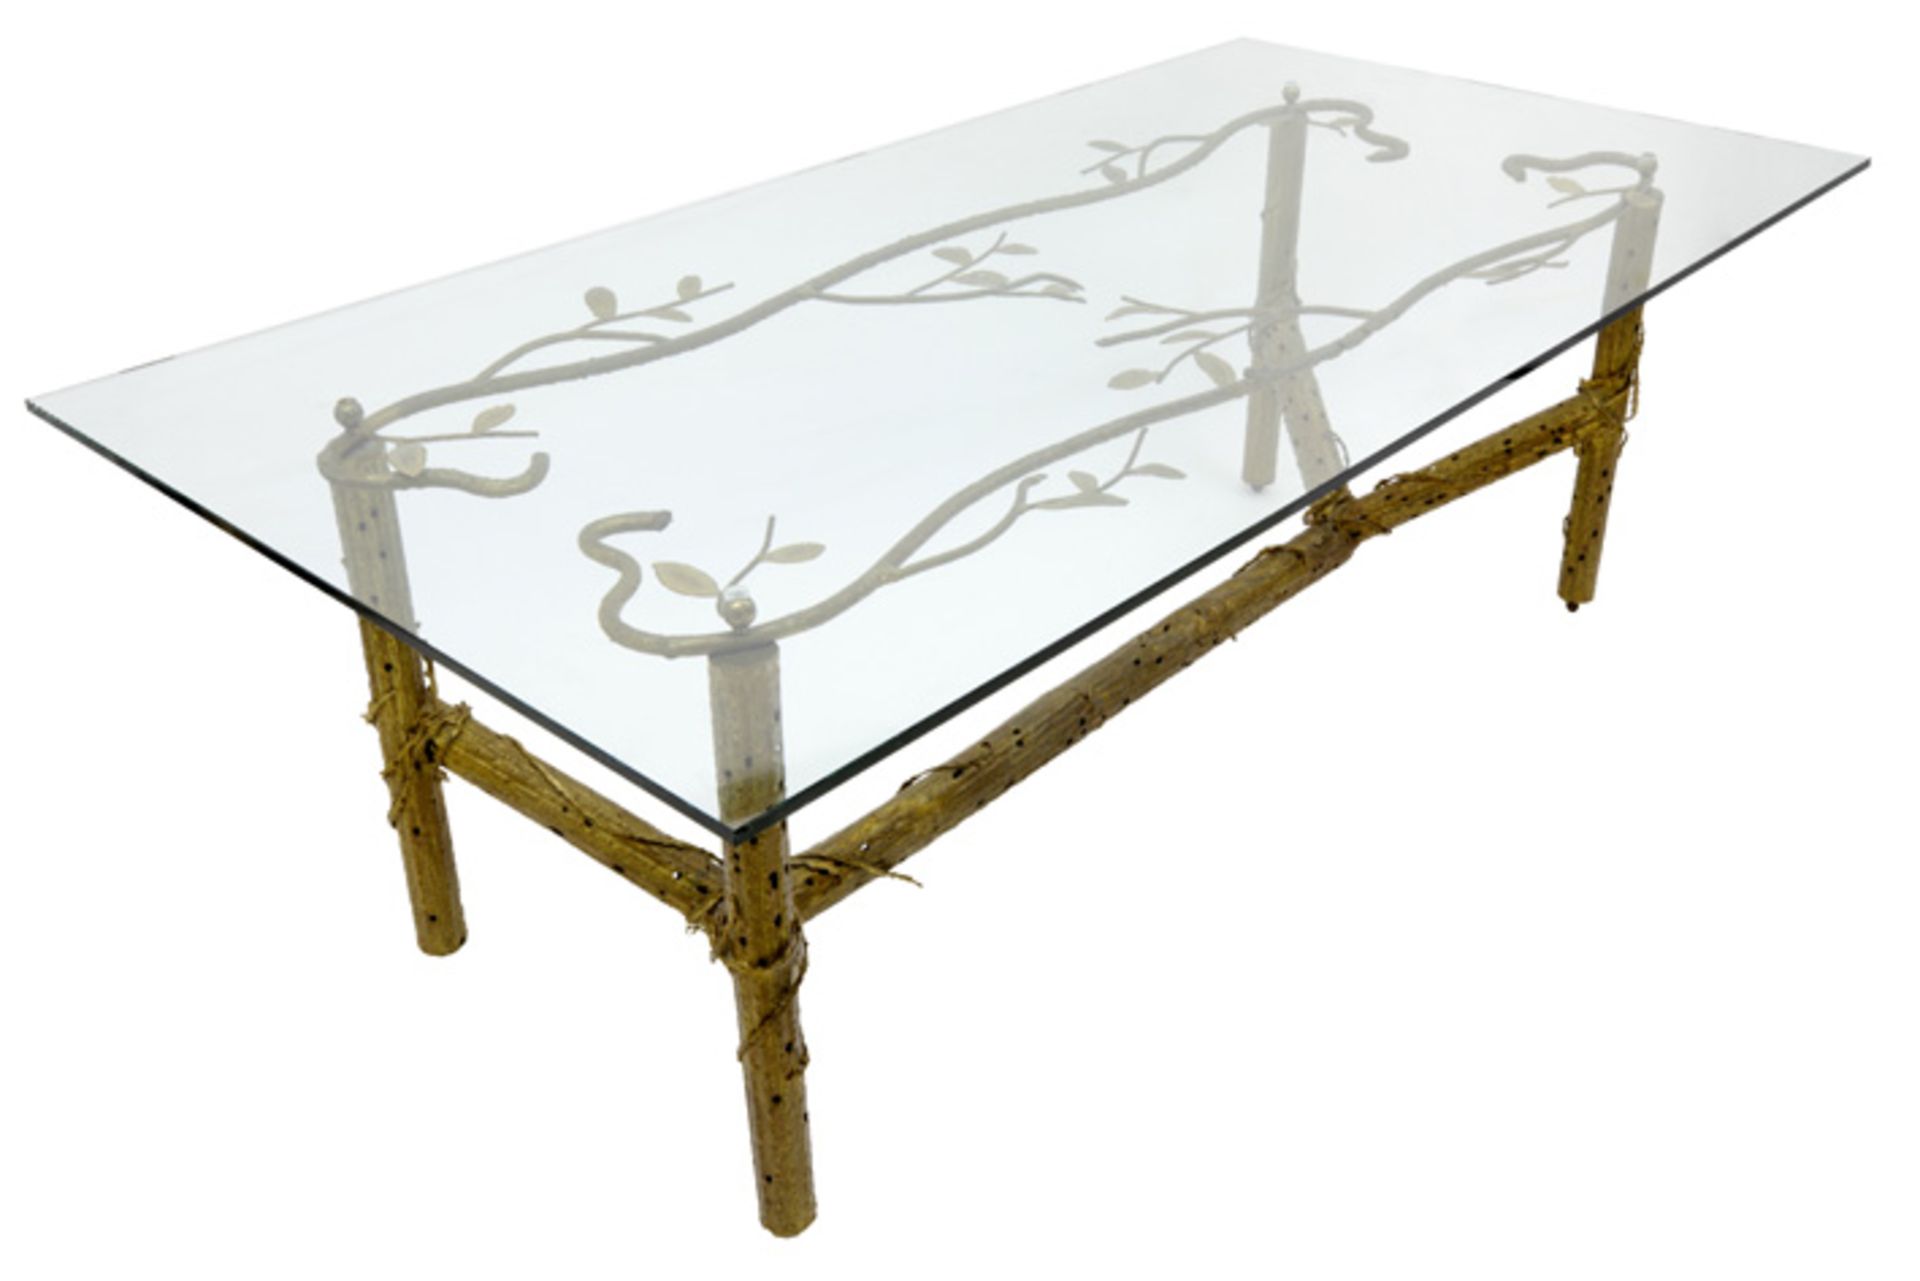 unique typical Paul Moerenhout table dd 1970 with base with vegetal ornamentation in gilded metal an